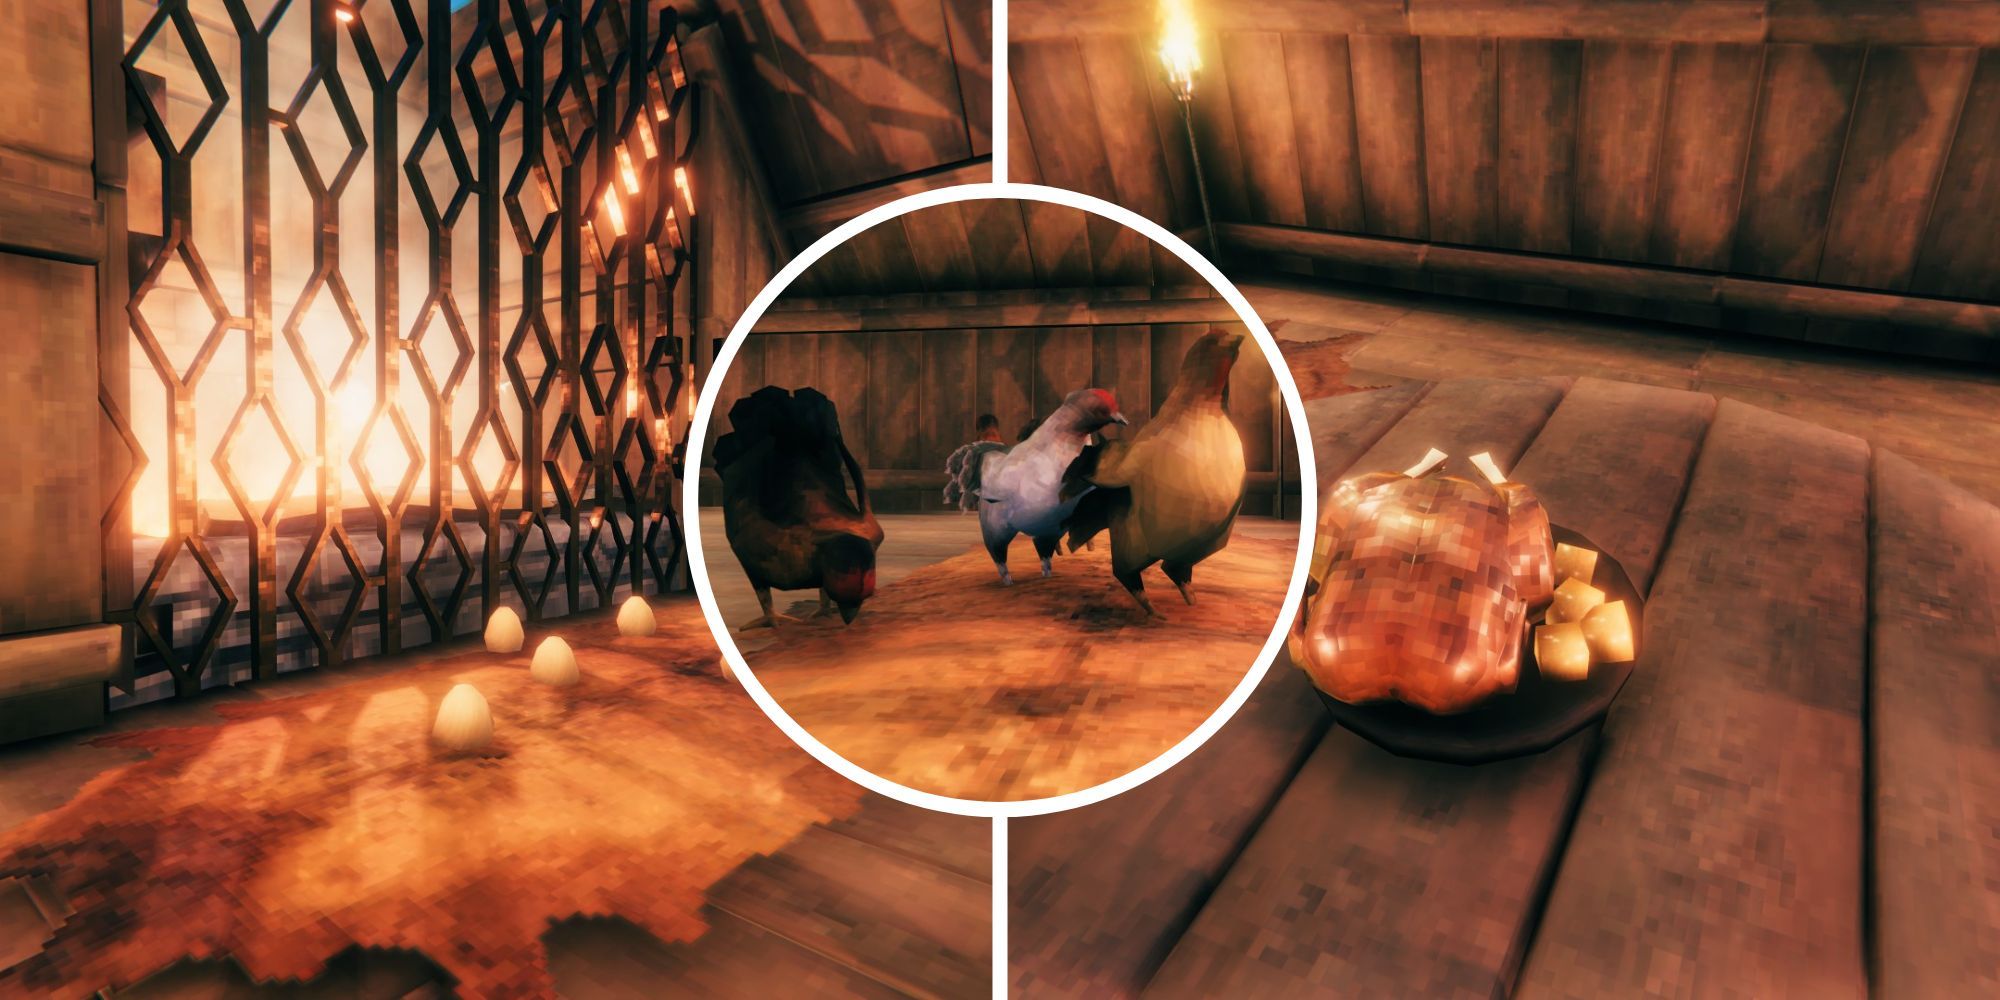 Eggs sit in front of a fire while Hens wander and a Honey Glazed Chicken sits on a table.